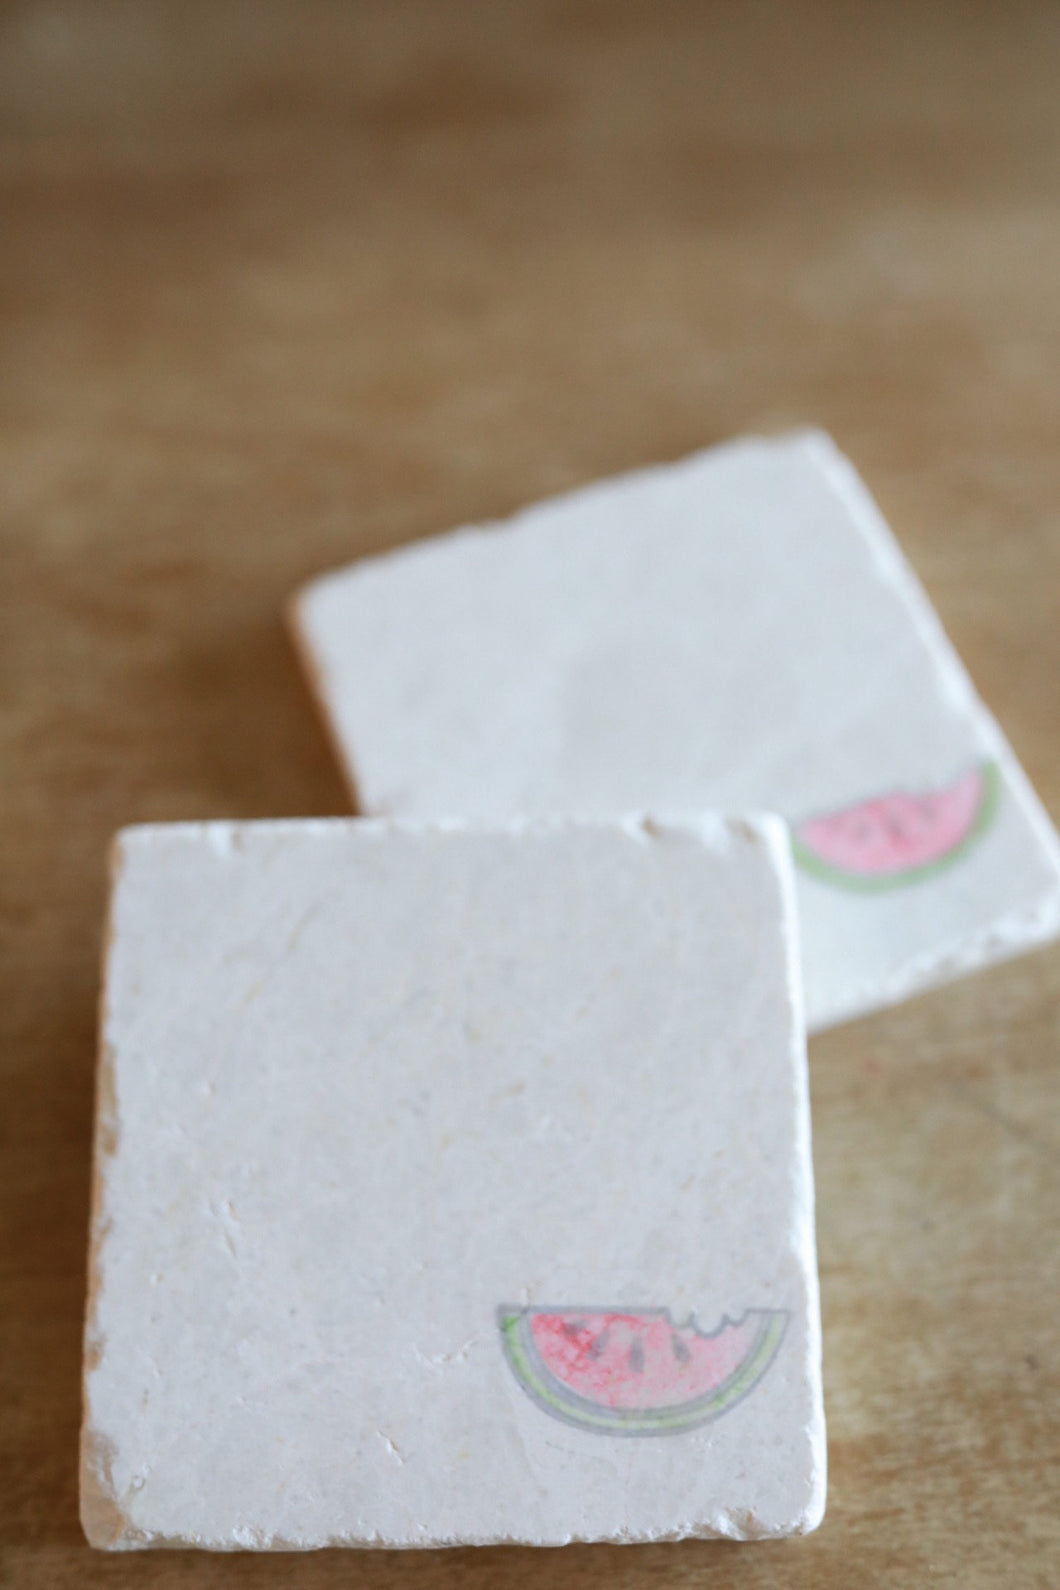 Watermelon in Corner Marble Coasters - Lace, Grace & Peonies